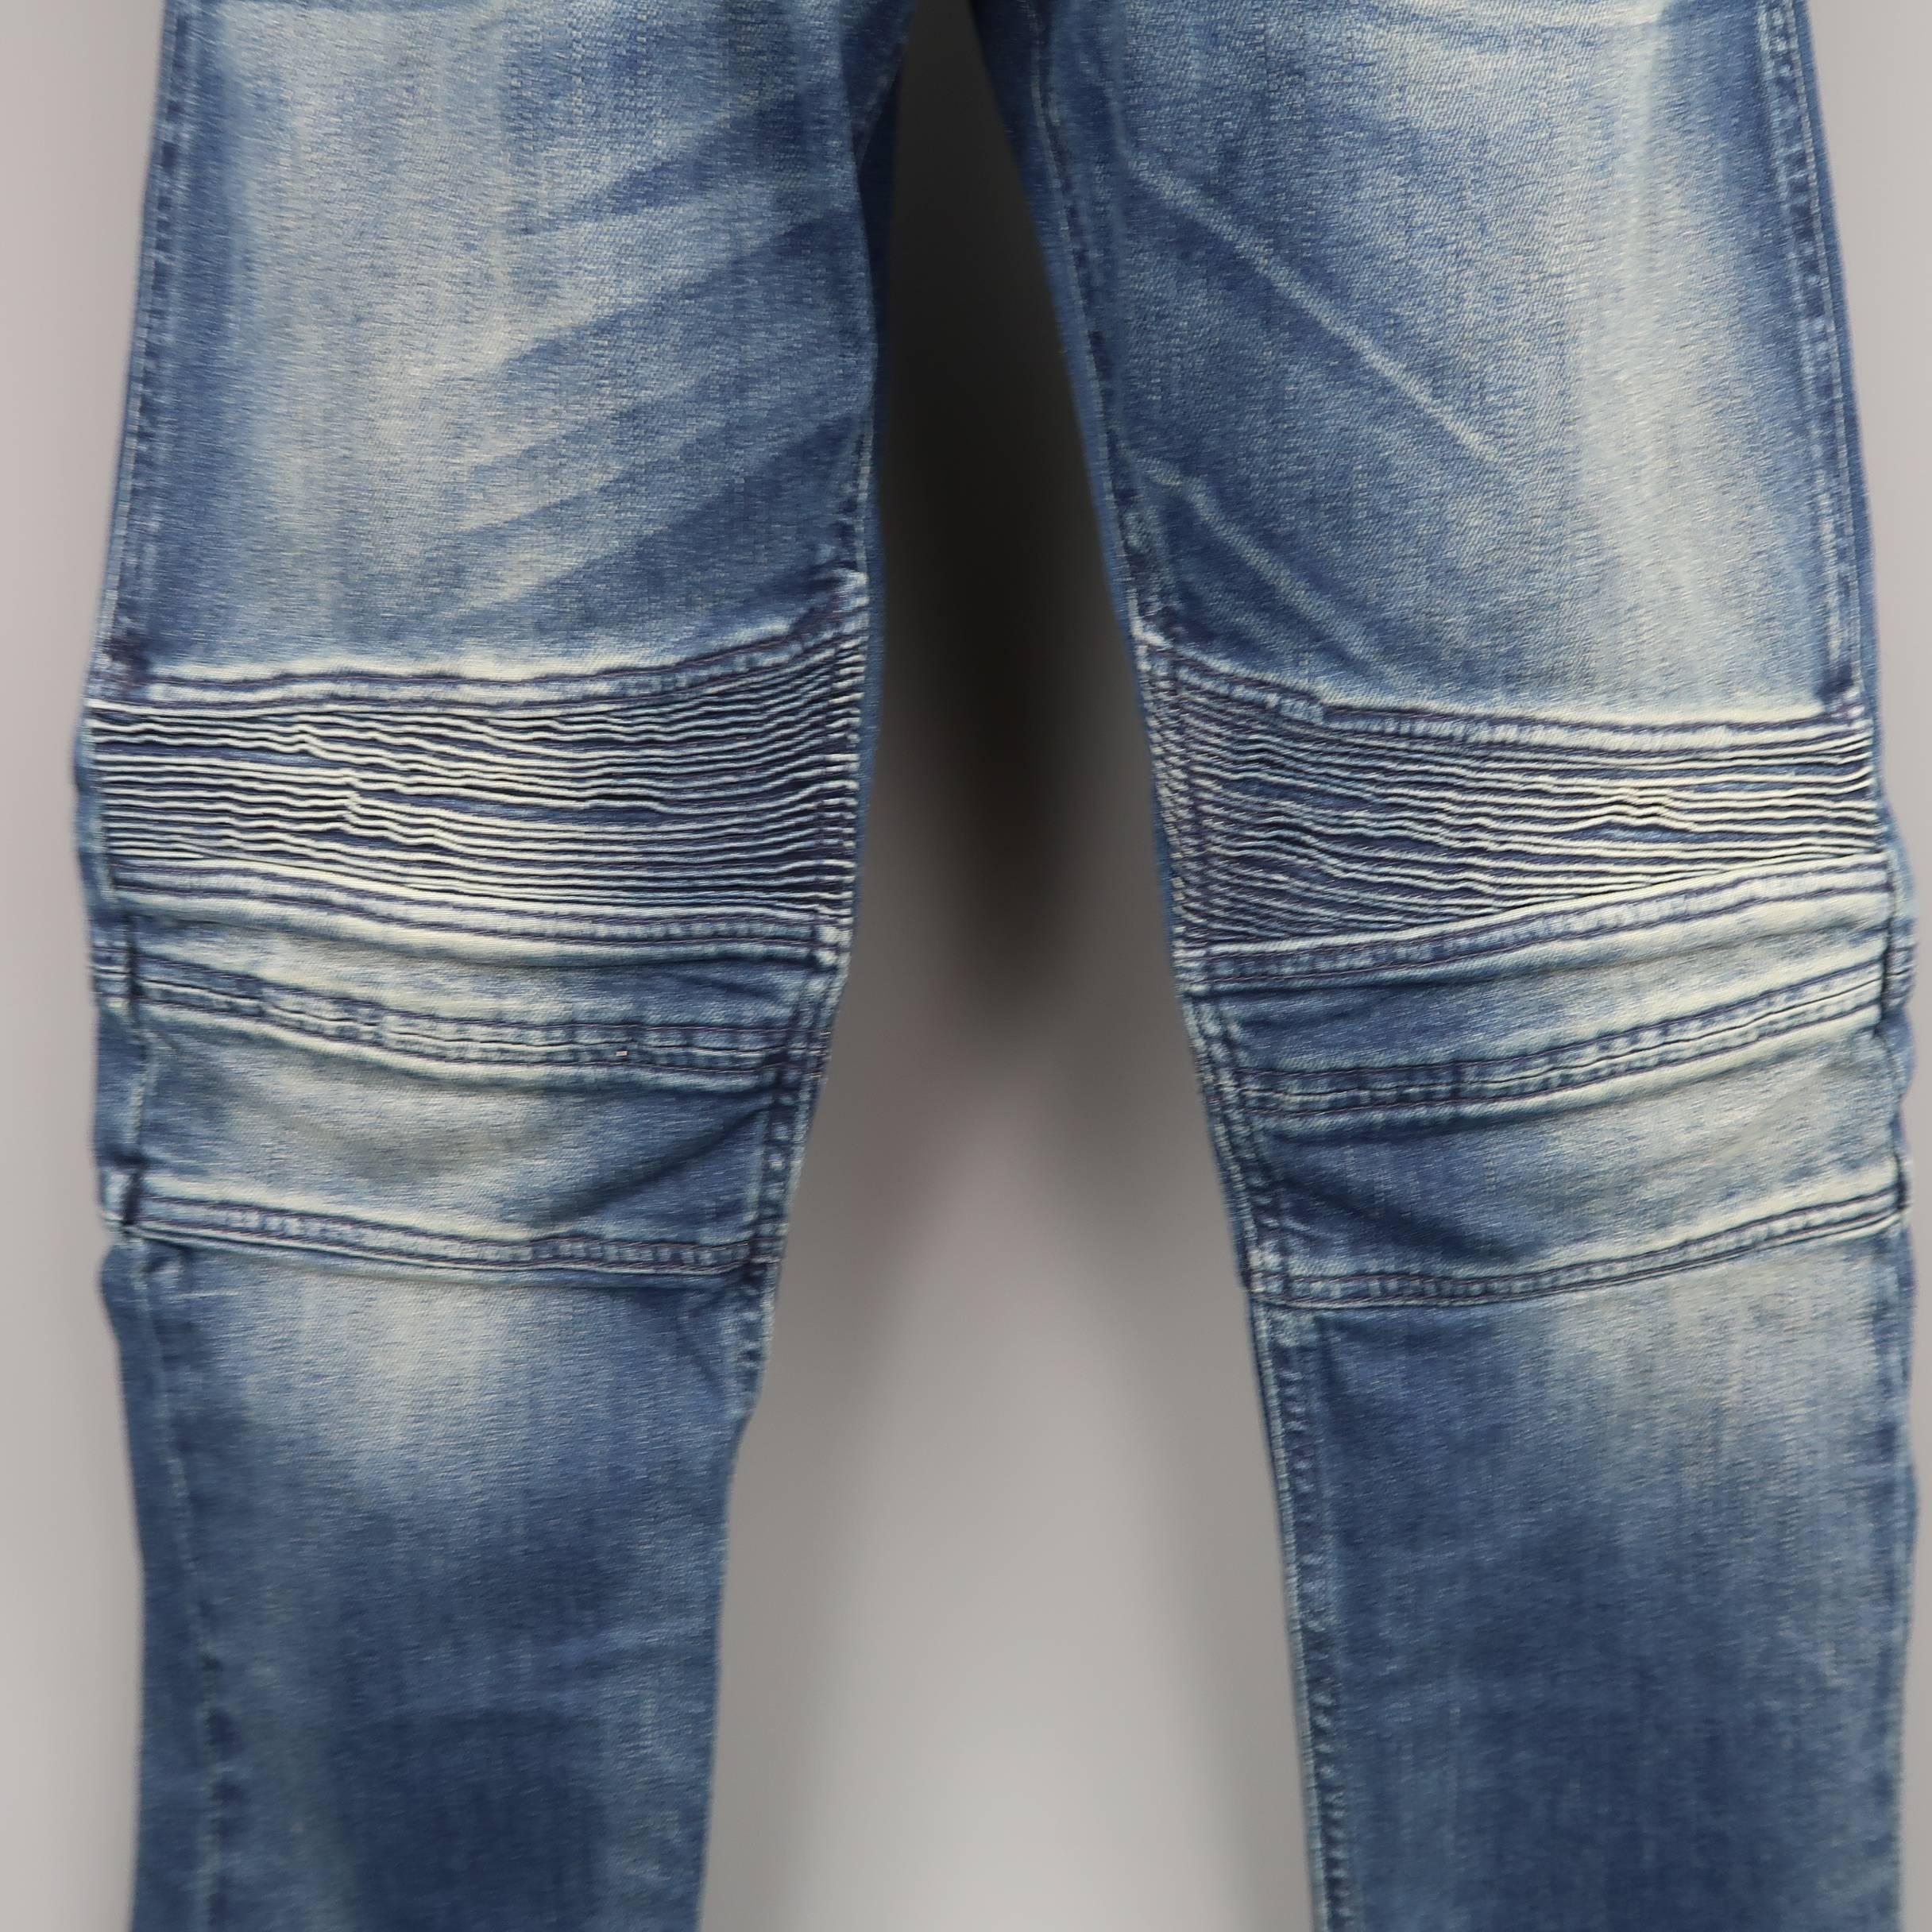 jeans with knee pads